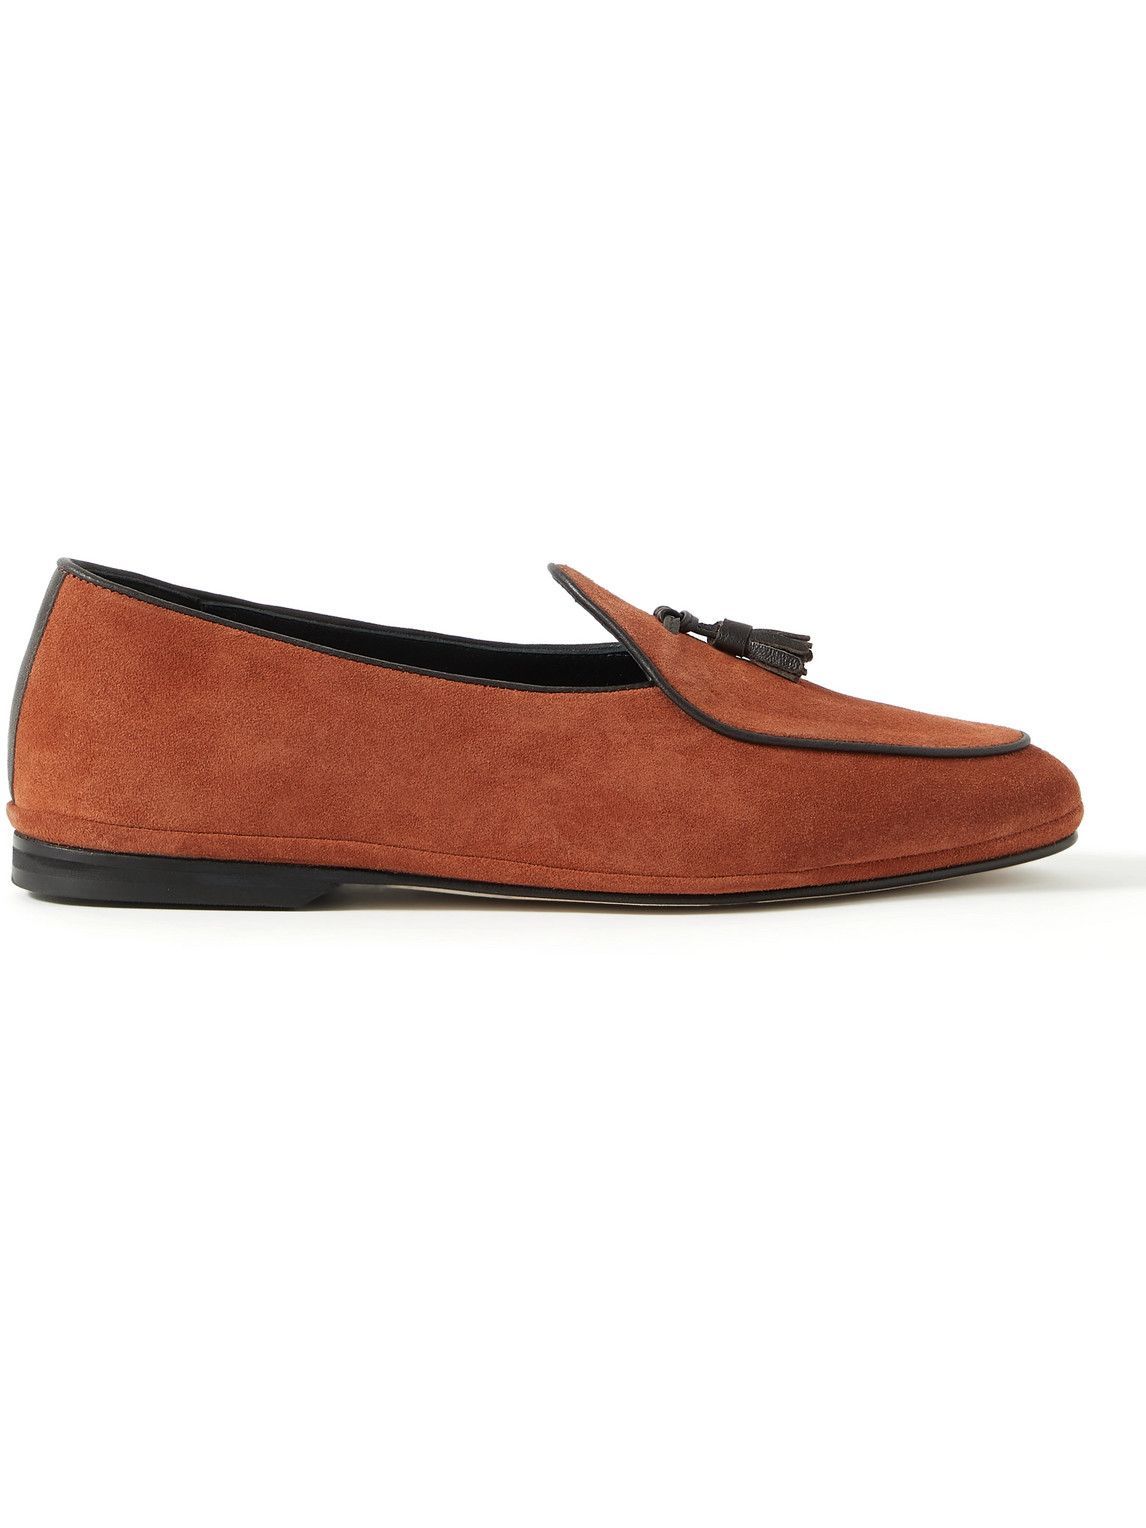 Rubinacci - Marphy Leather-Trimmed Suede Tasselled Loafers - Brown ...